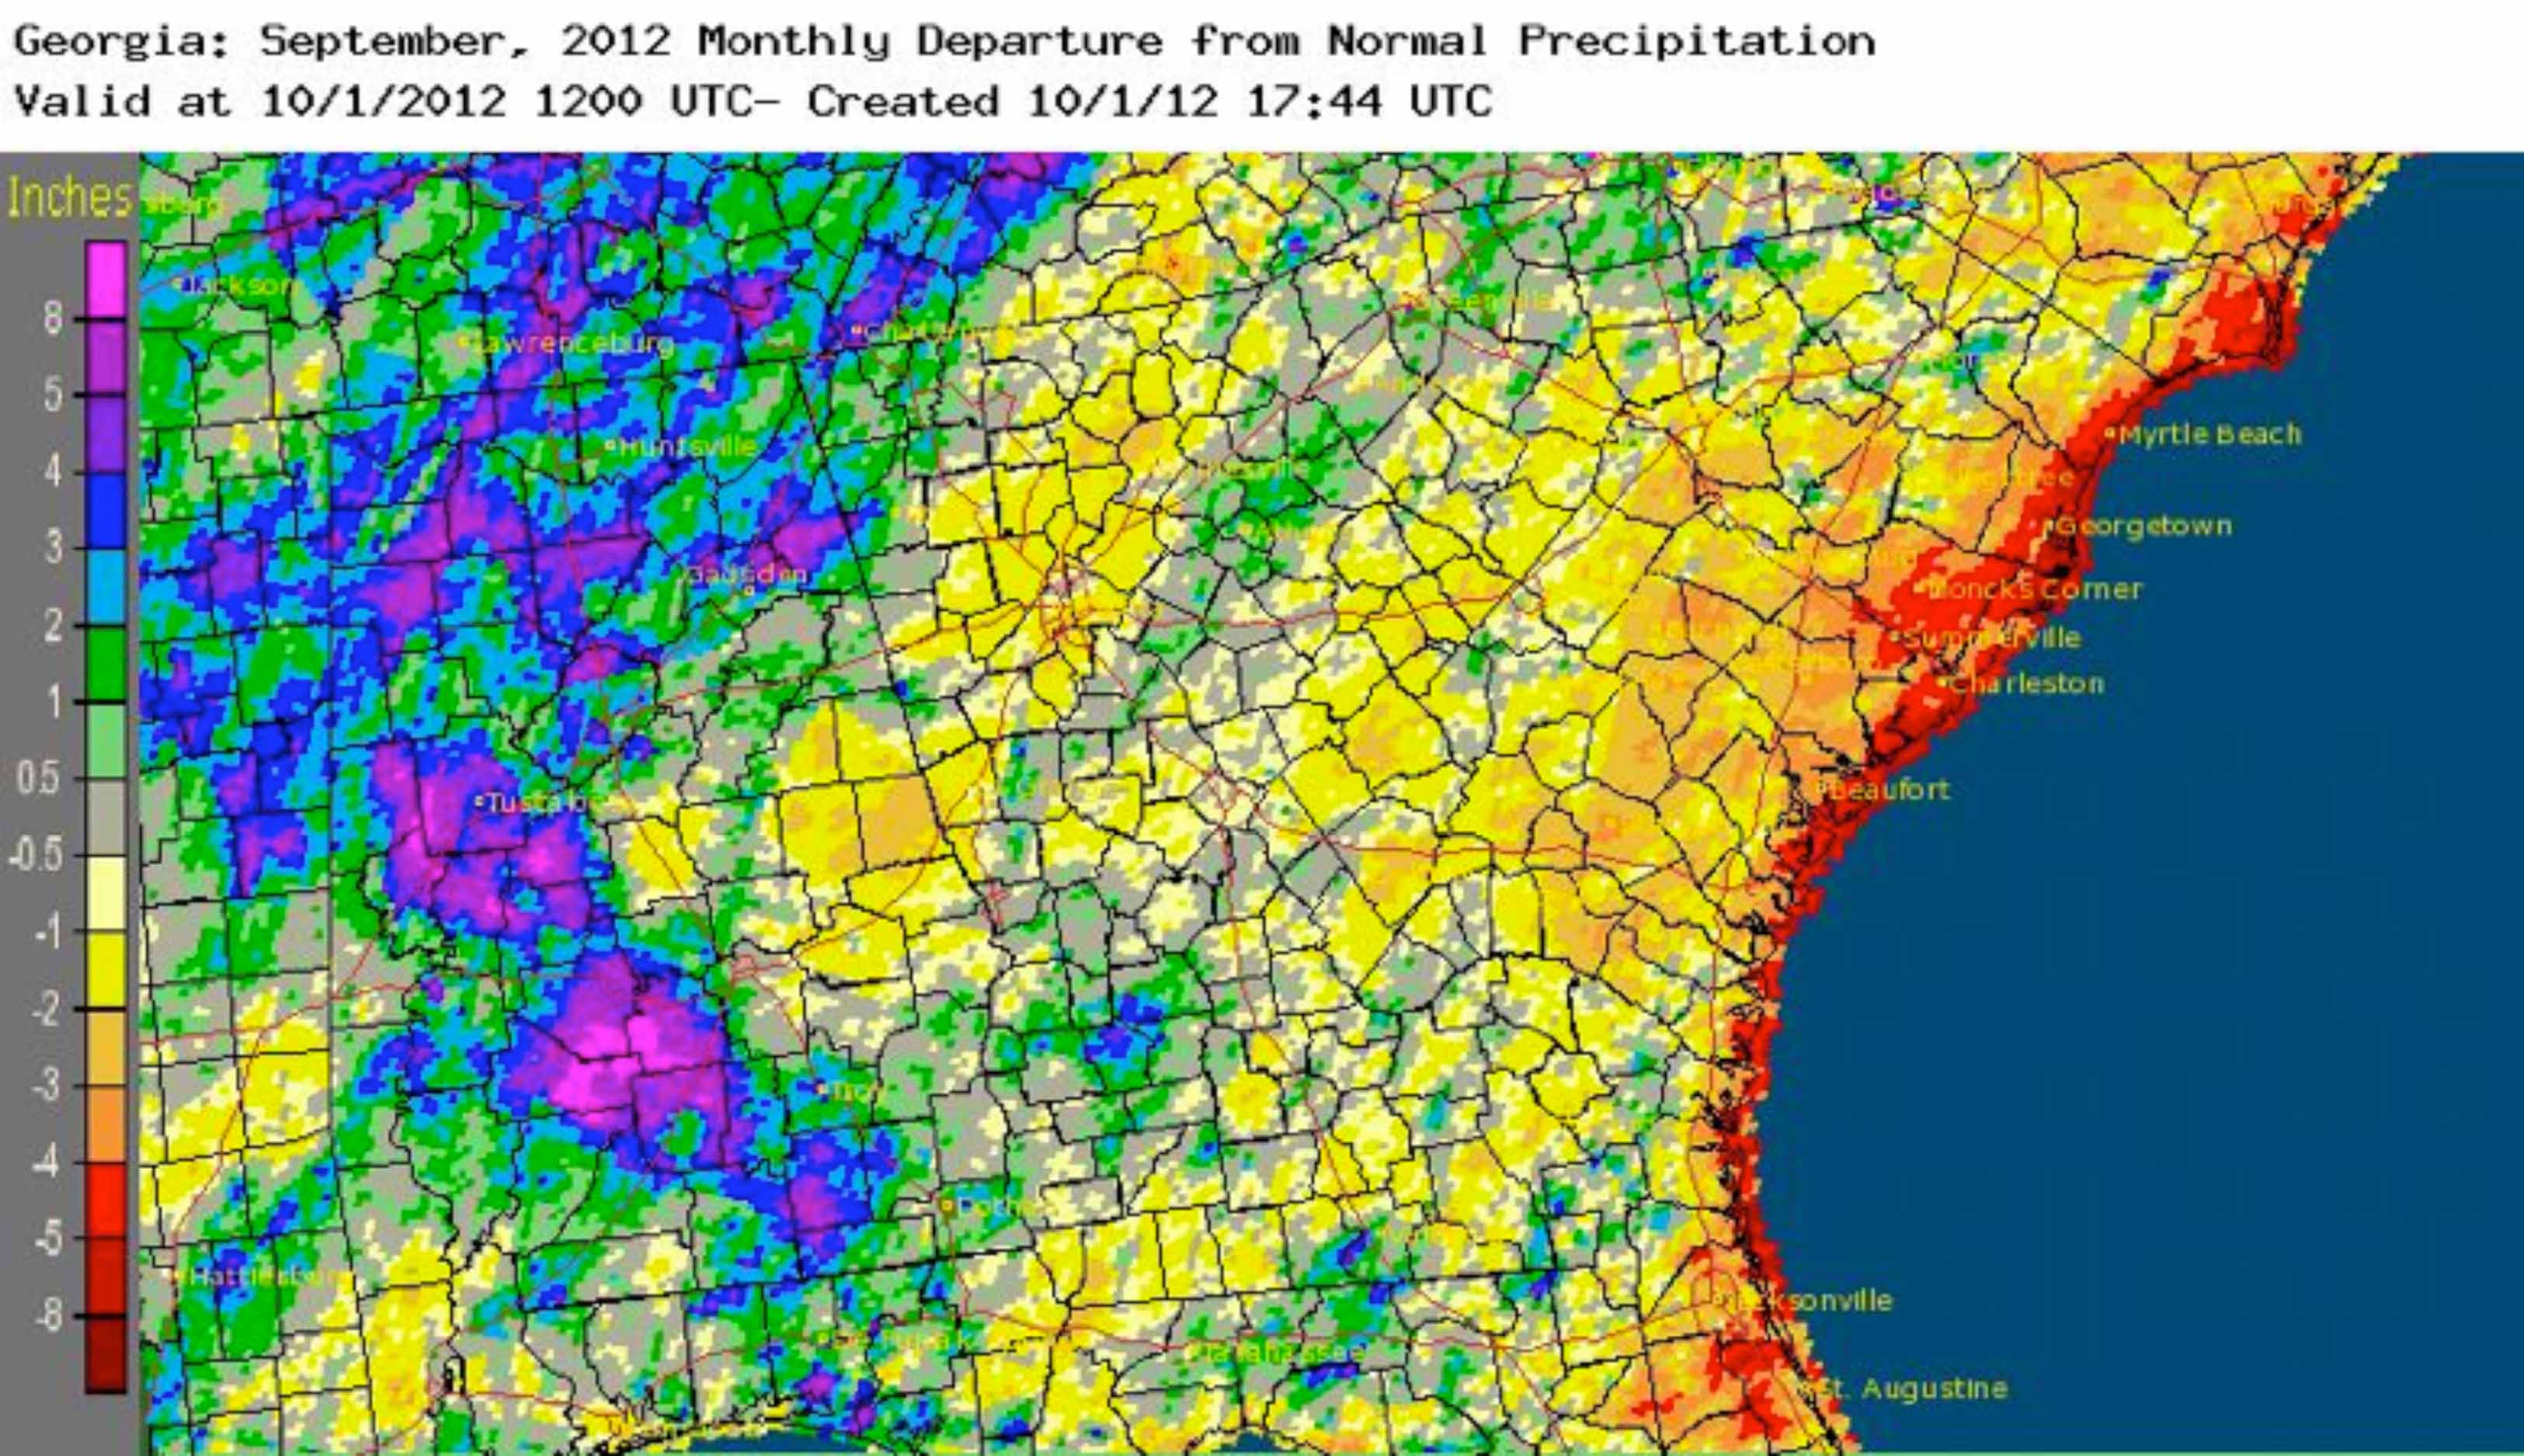 Georgia saw a slightly drier than average September, but the state did see plenty of rain at the beginning of the month when the remnants of Hurricane Isaac blew through.